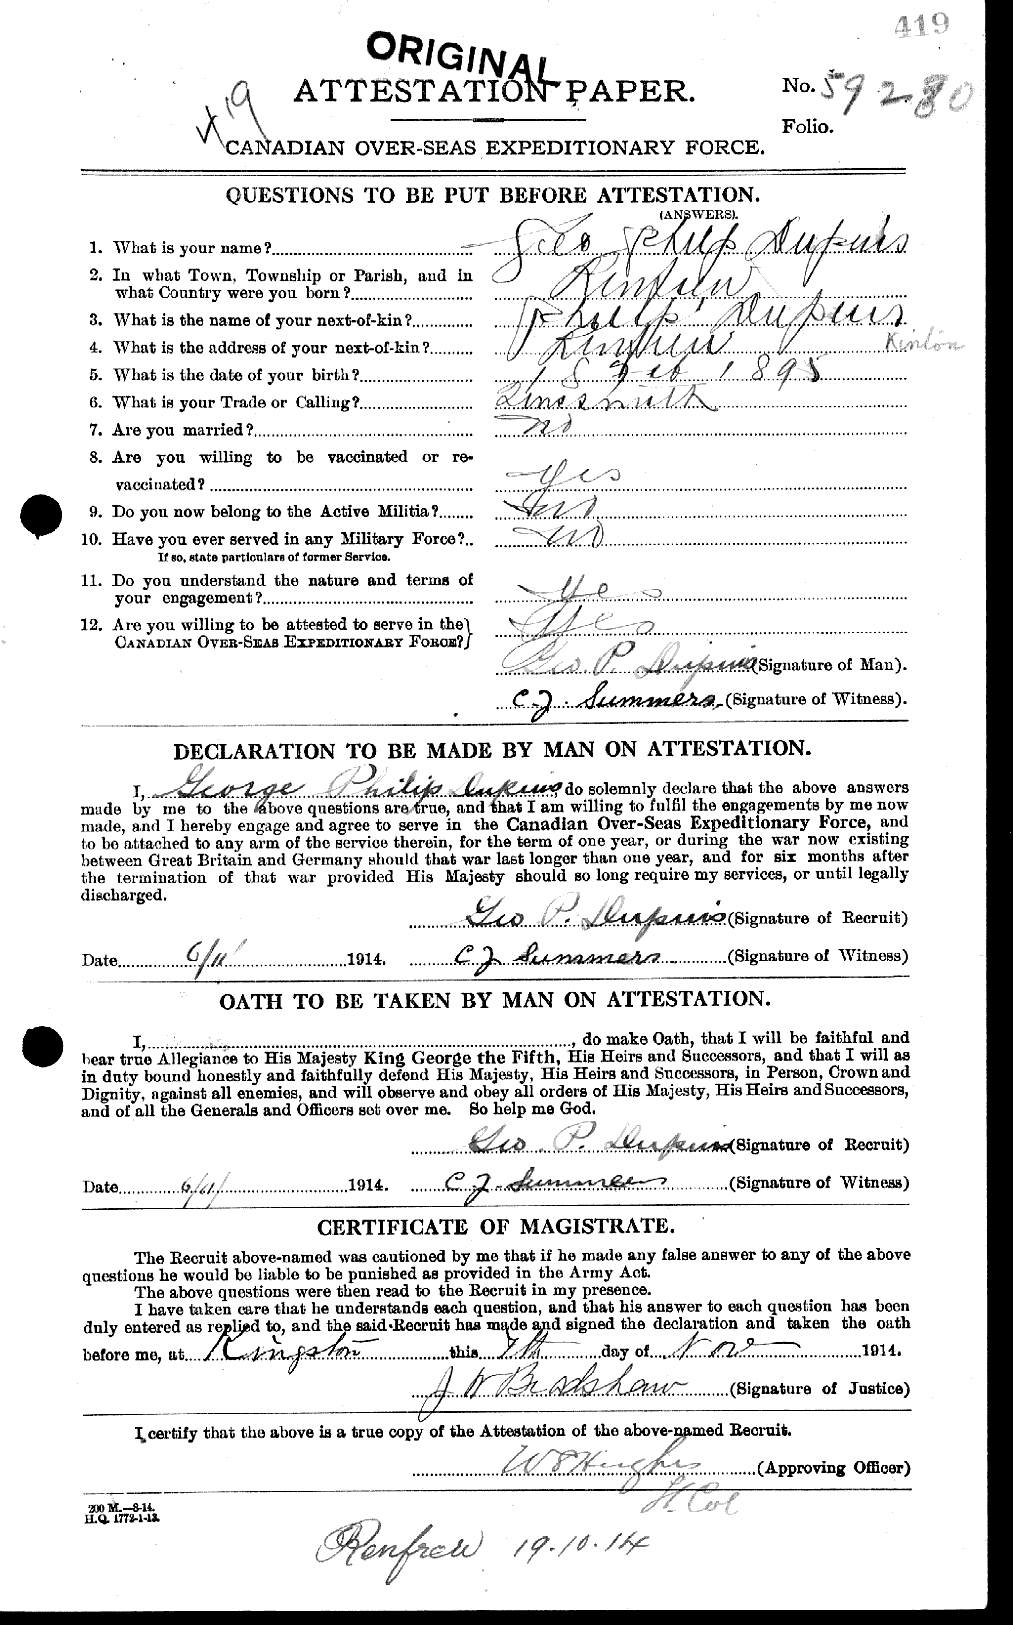 Personnel Records of the First World War - CEF 051287a